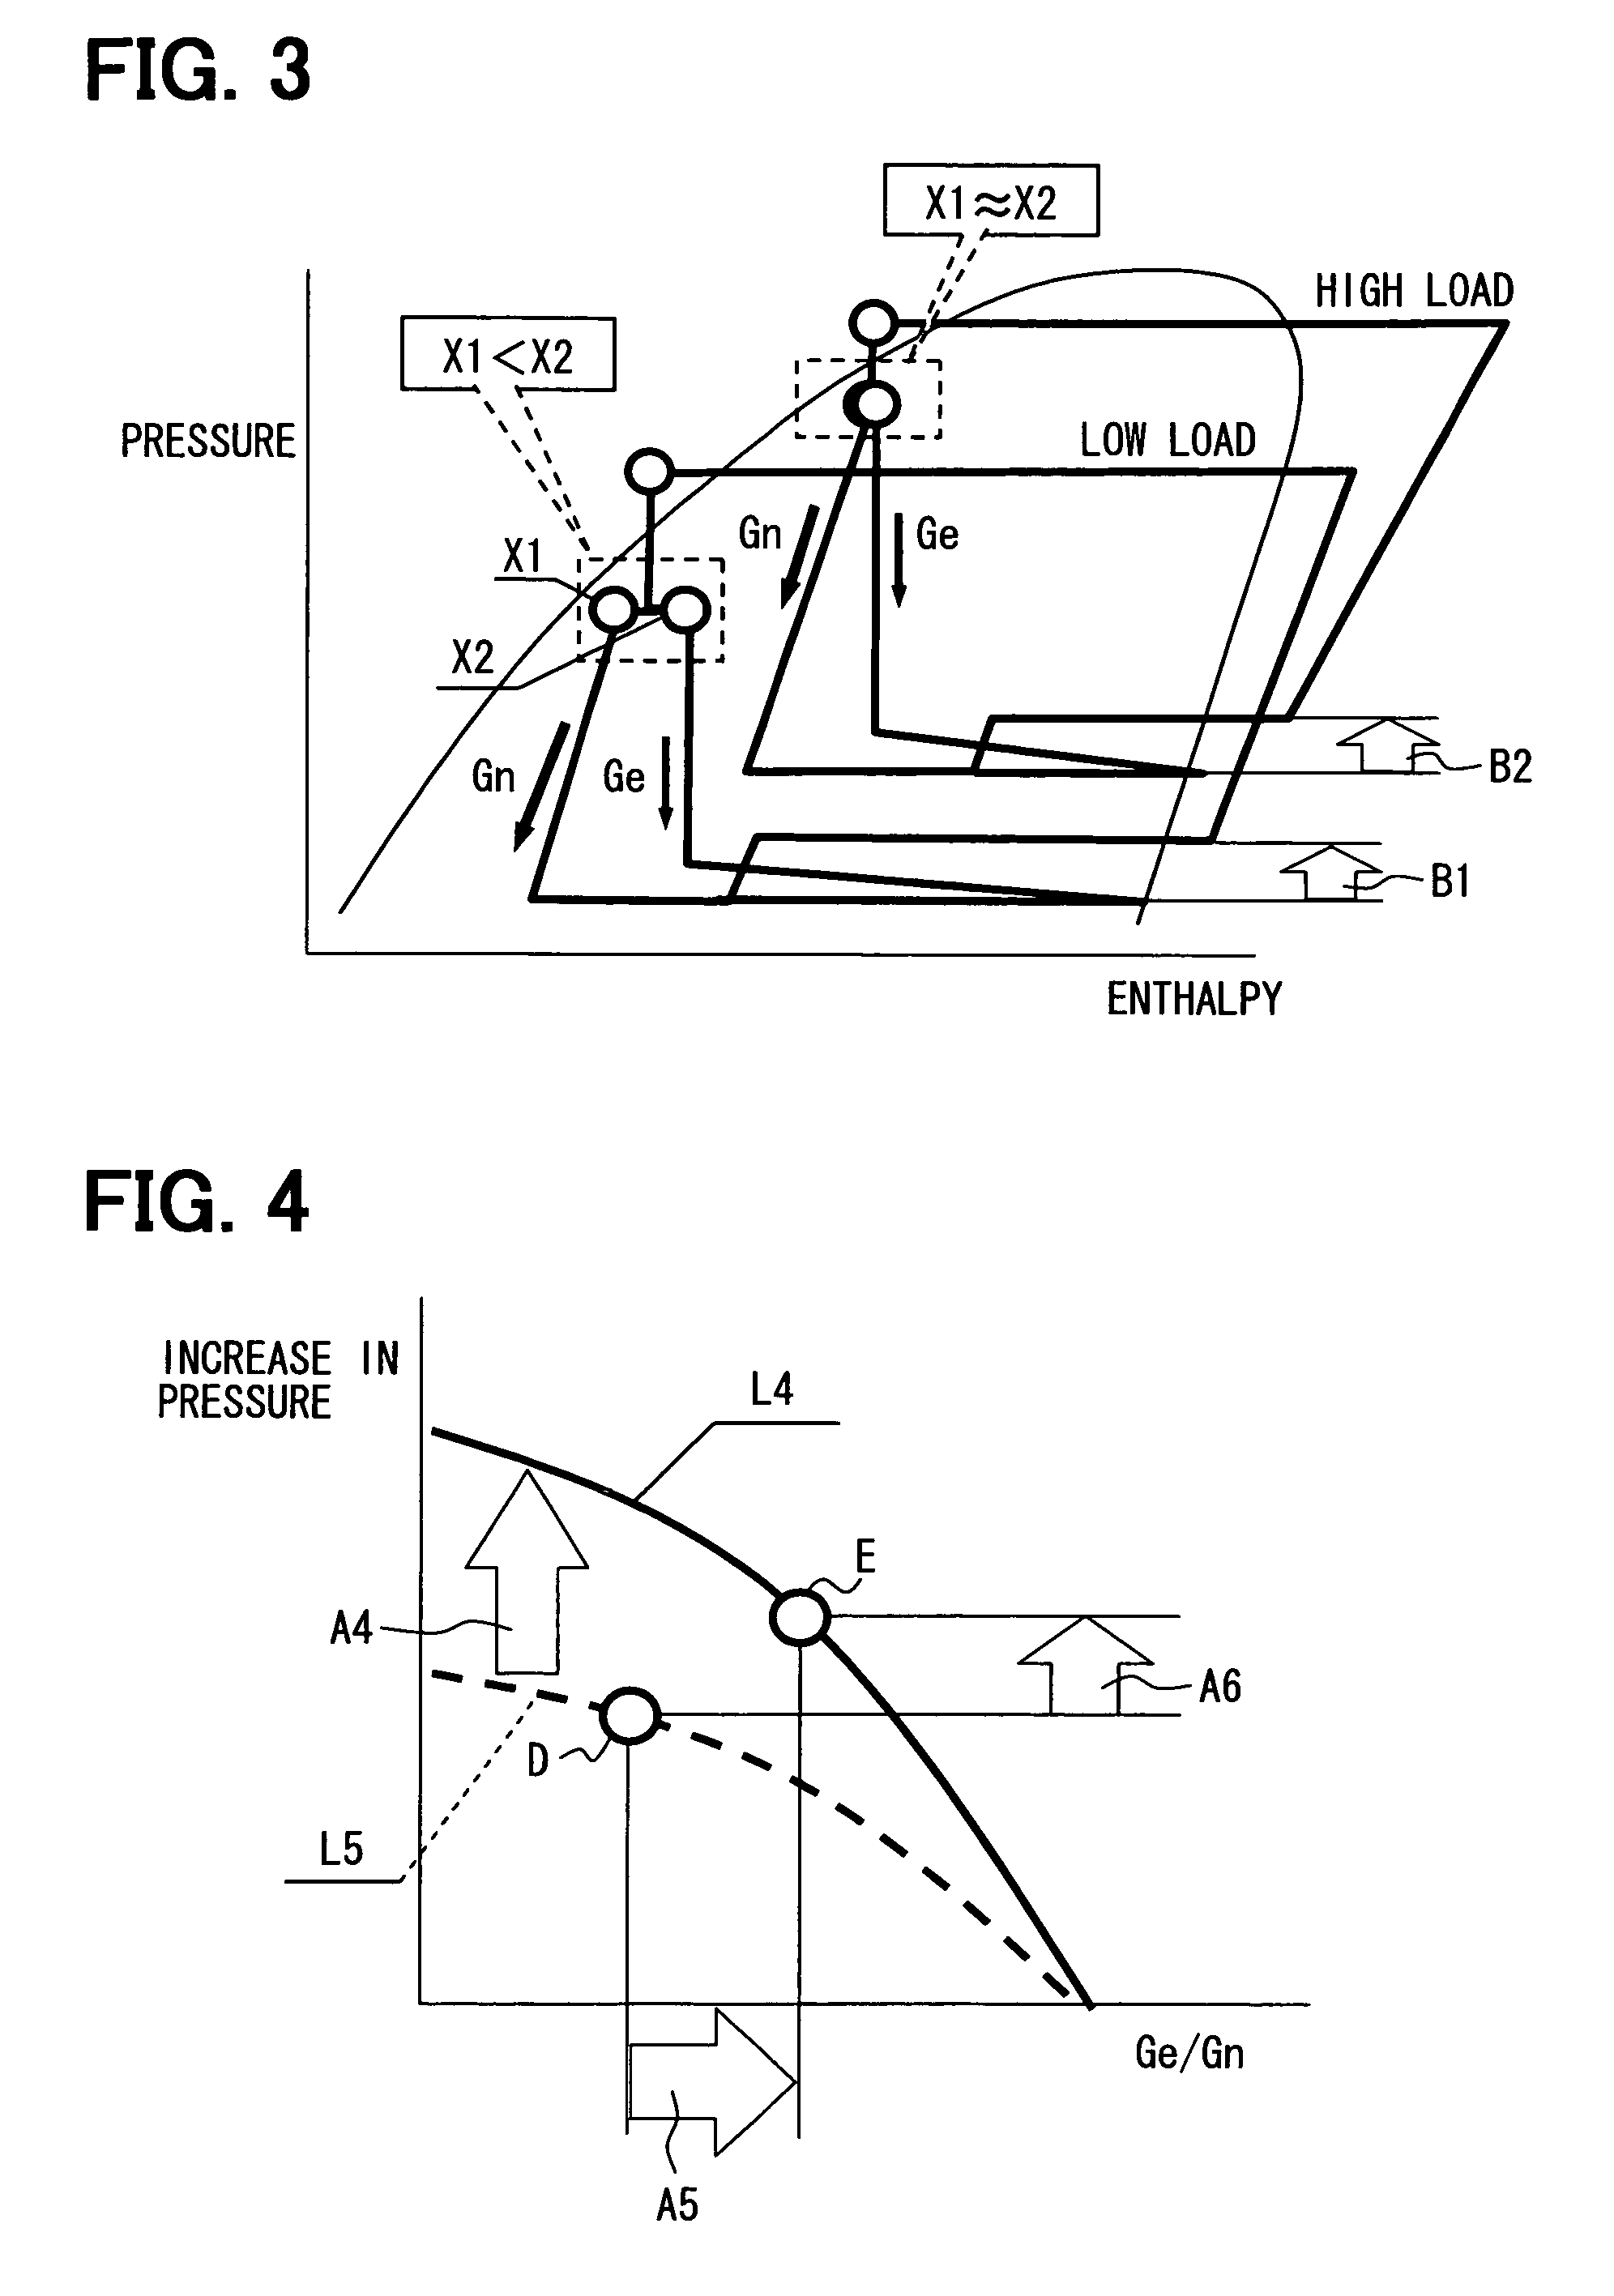 Vapor compression refrigerating cycle apparatus with an ejector and distributor